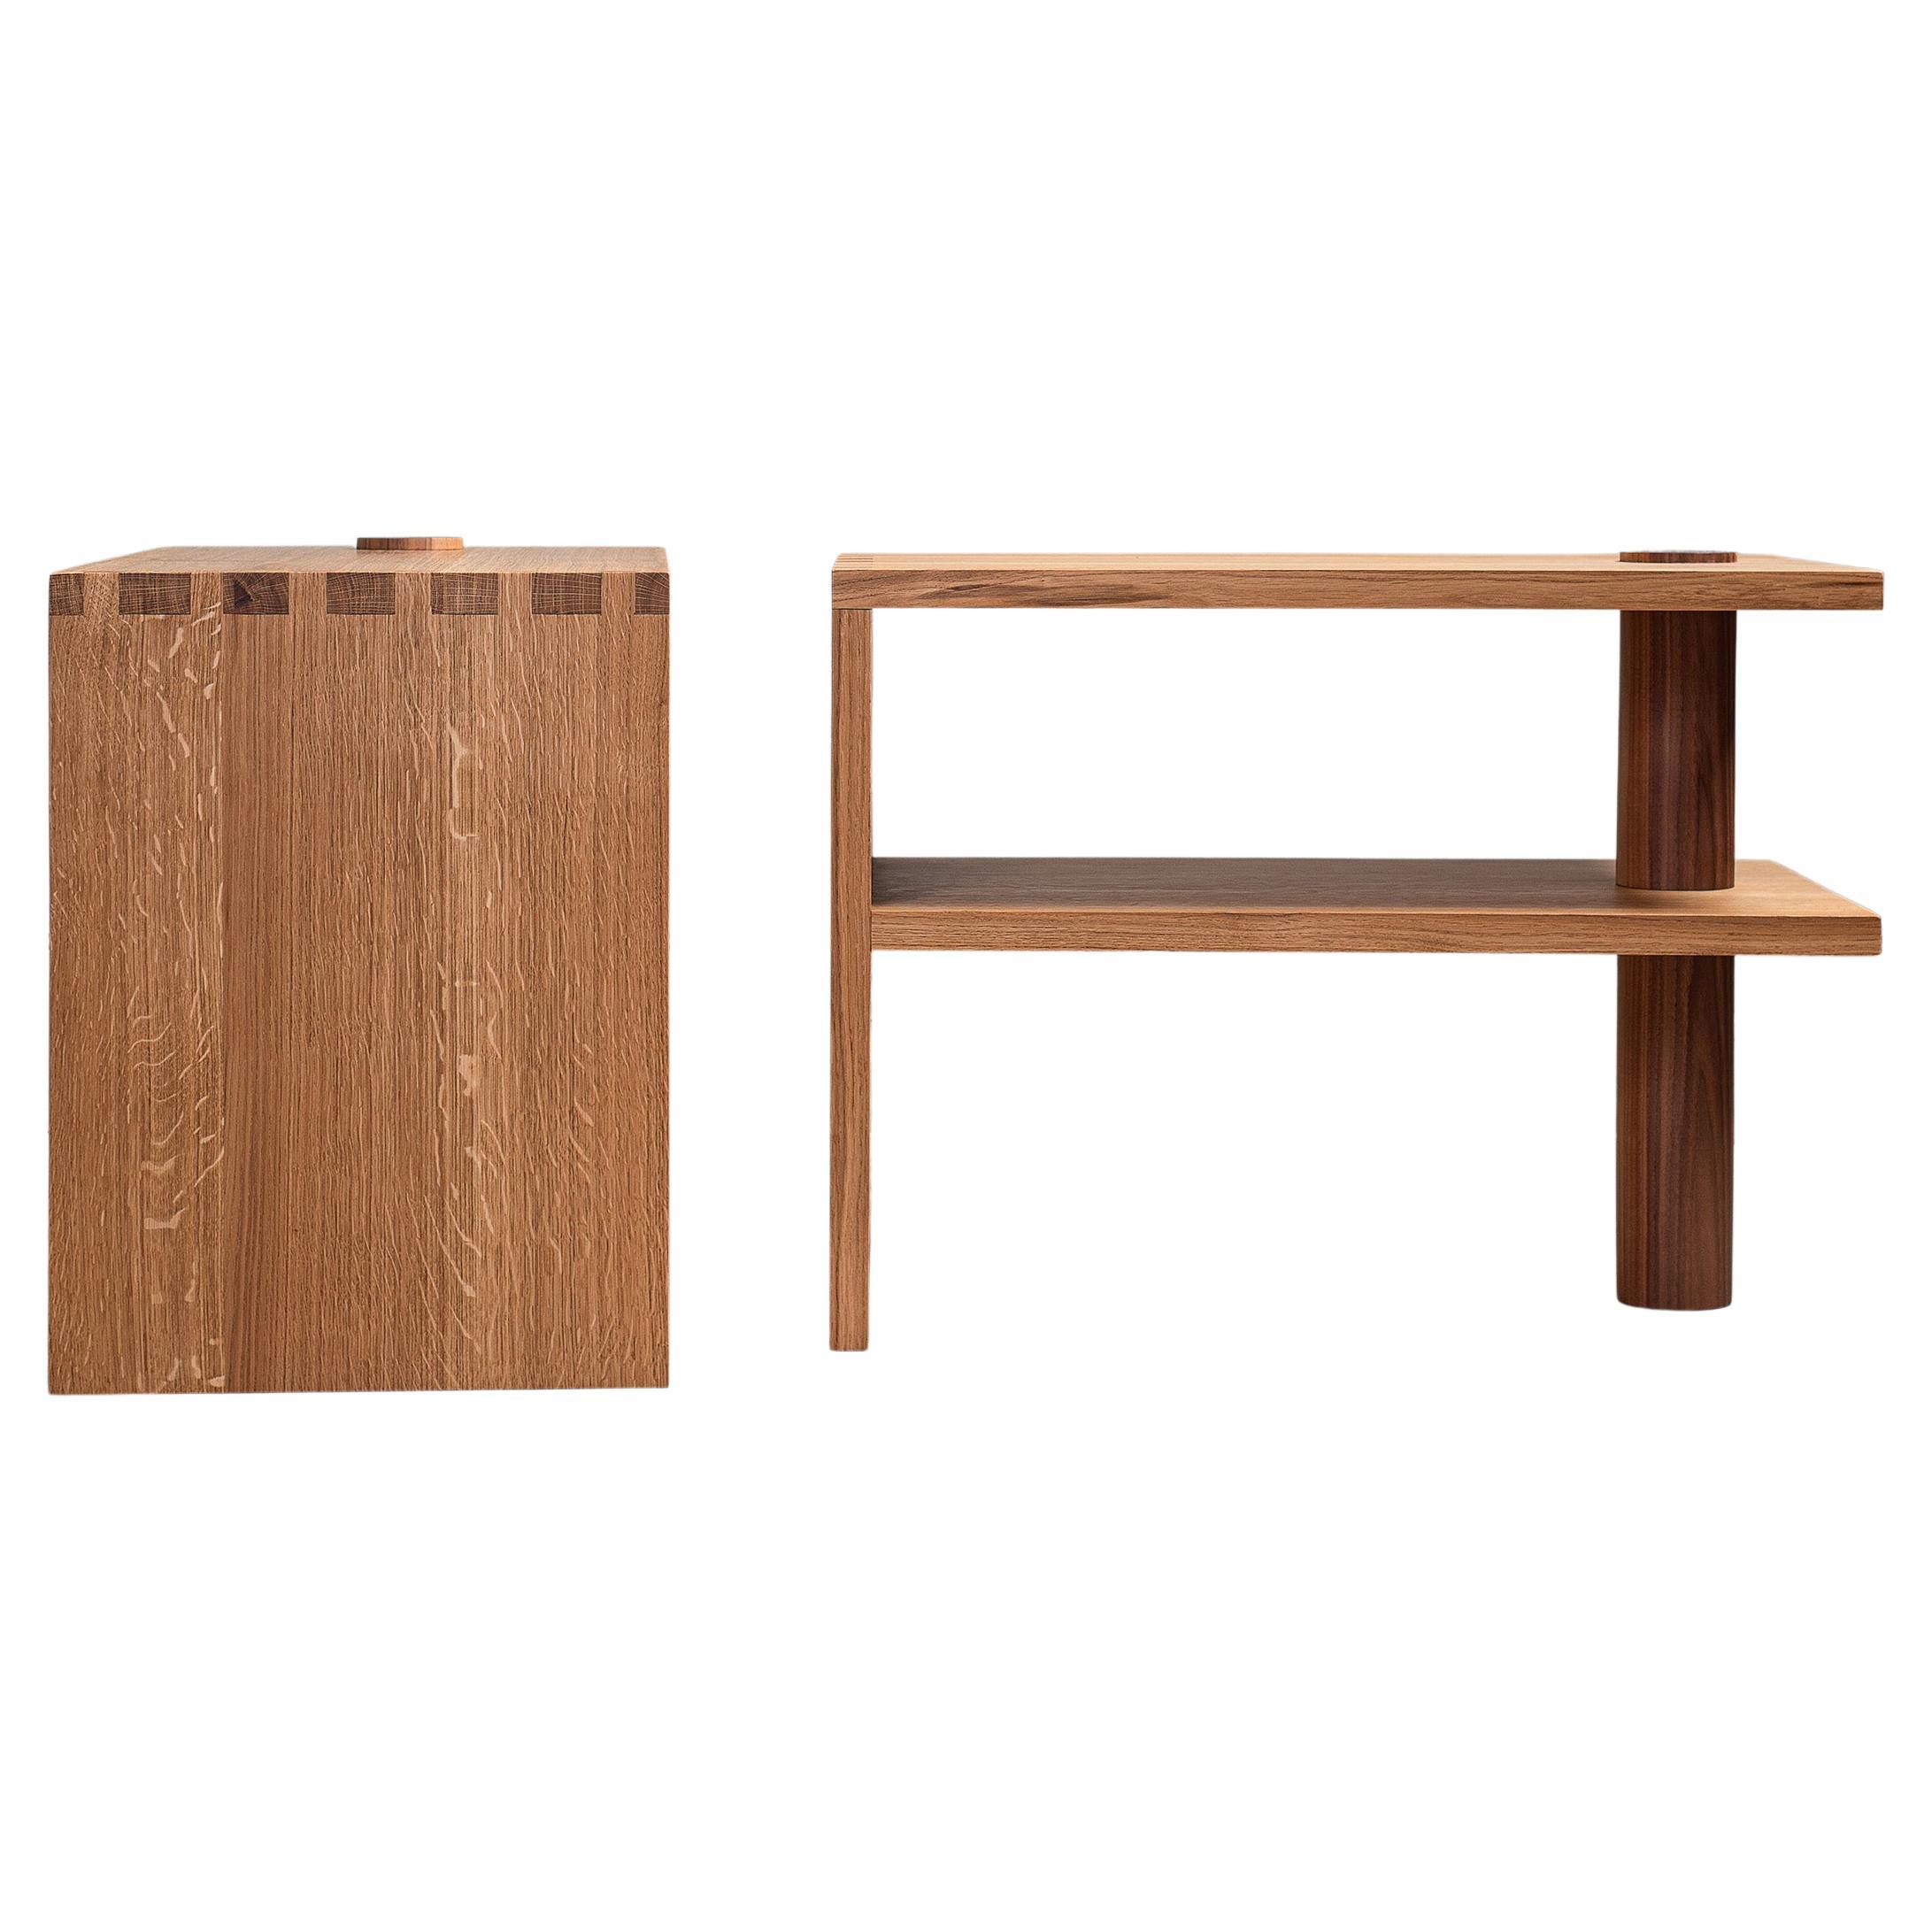 Monumental Handcrafted Oak & Walnut Night Stands, End Tables